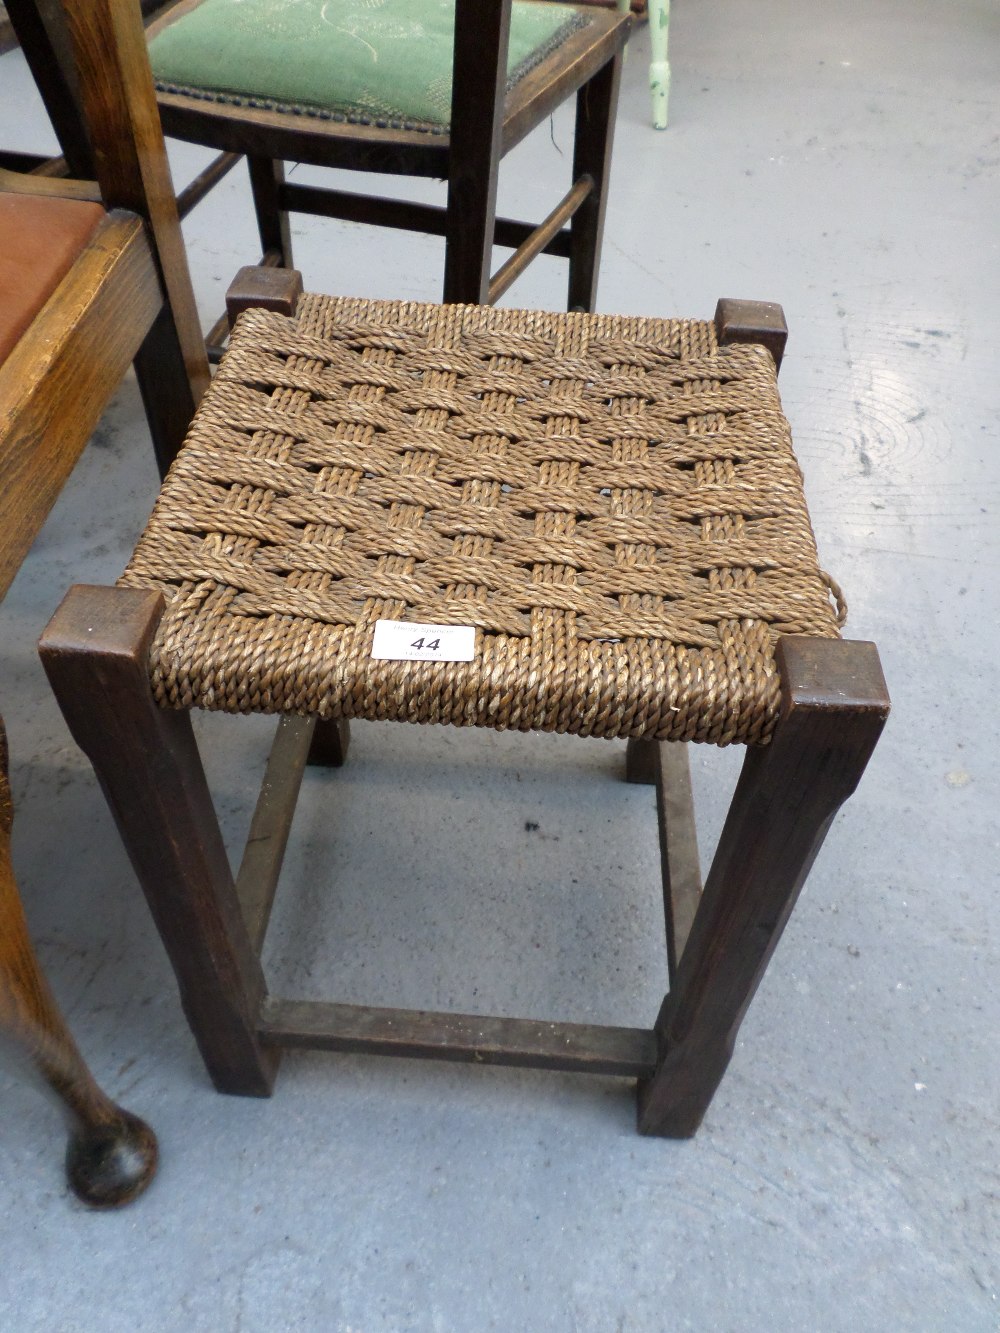 Small wooden stool with wicker seat